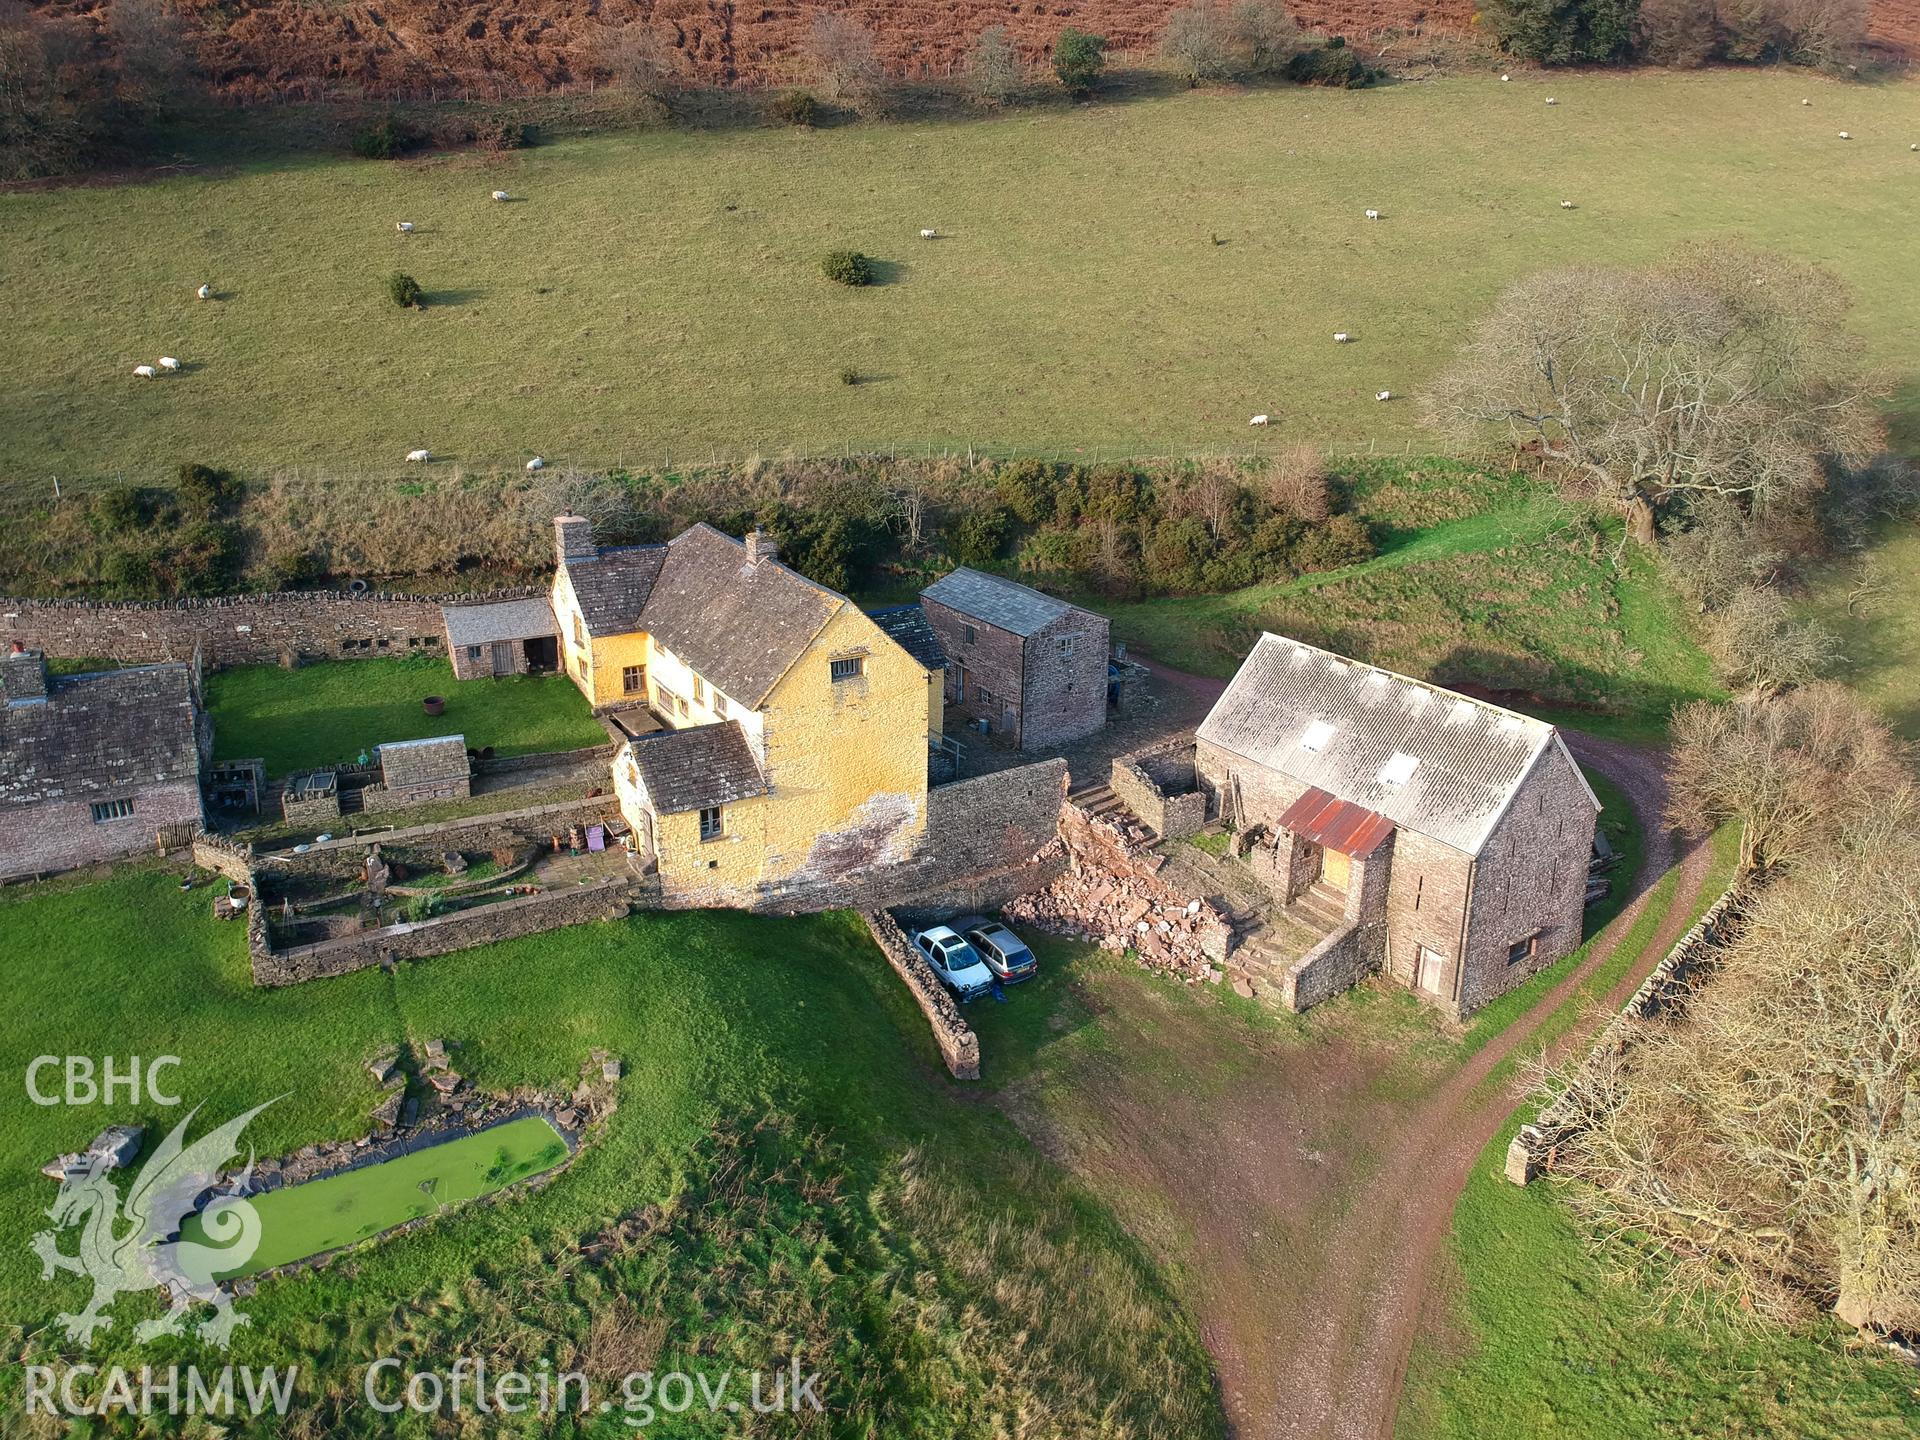 Aerial view of Ty-Hwnt-y-Bwlch, Crucorney. Colour photograph taken by Paul R. Davis on 1st January 2019.